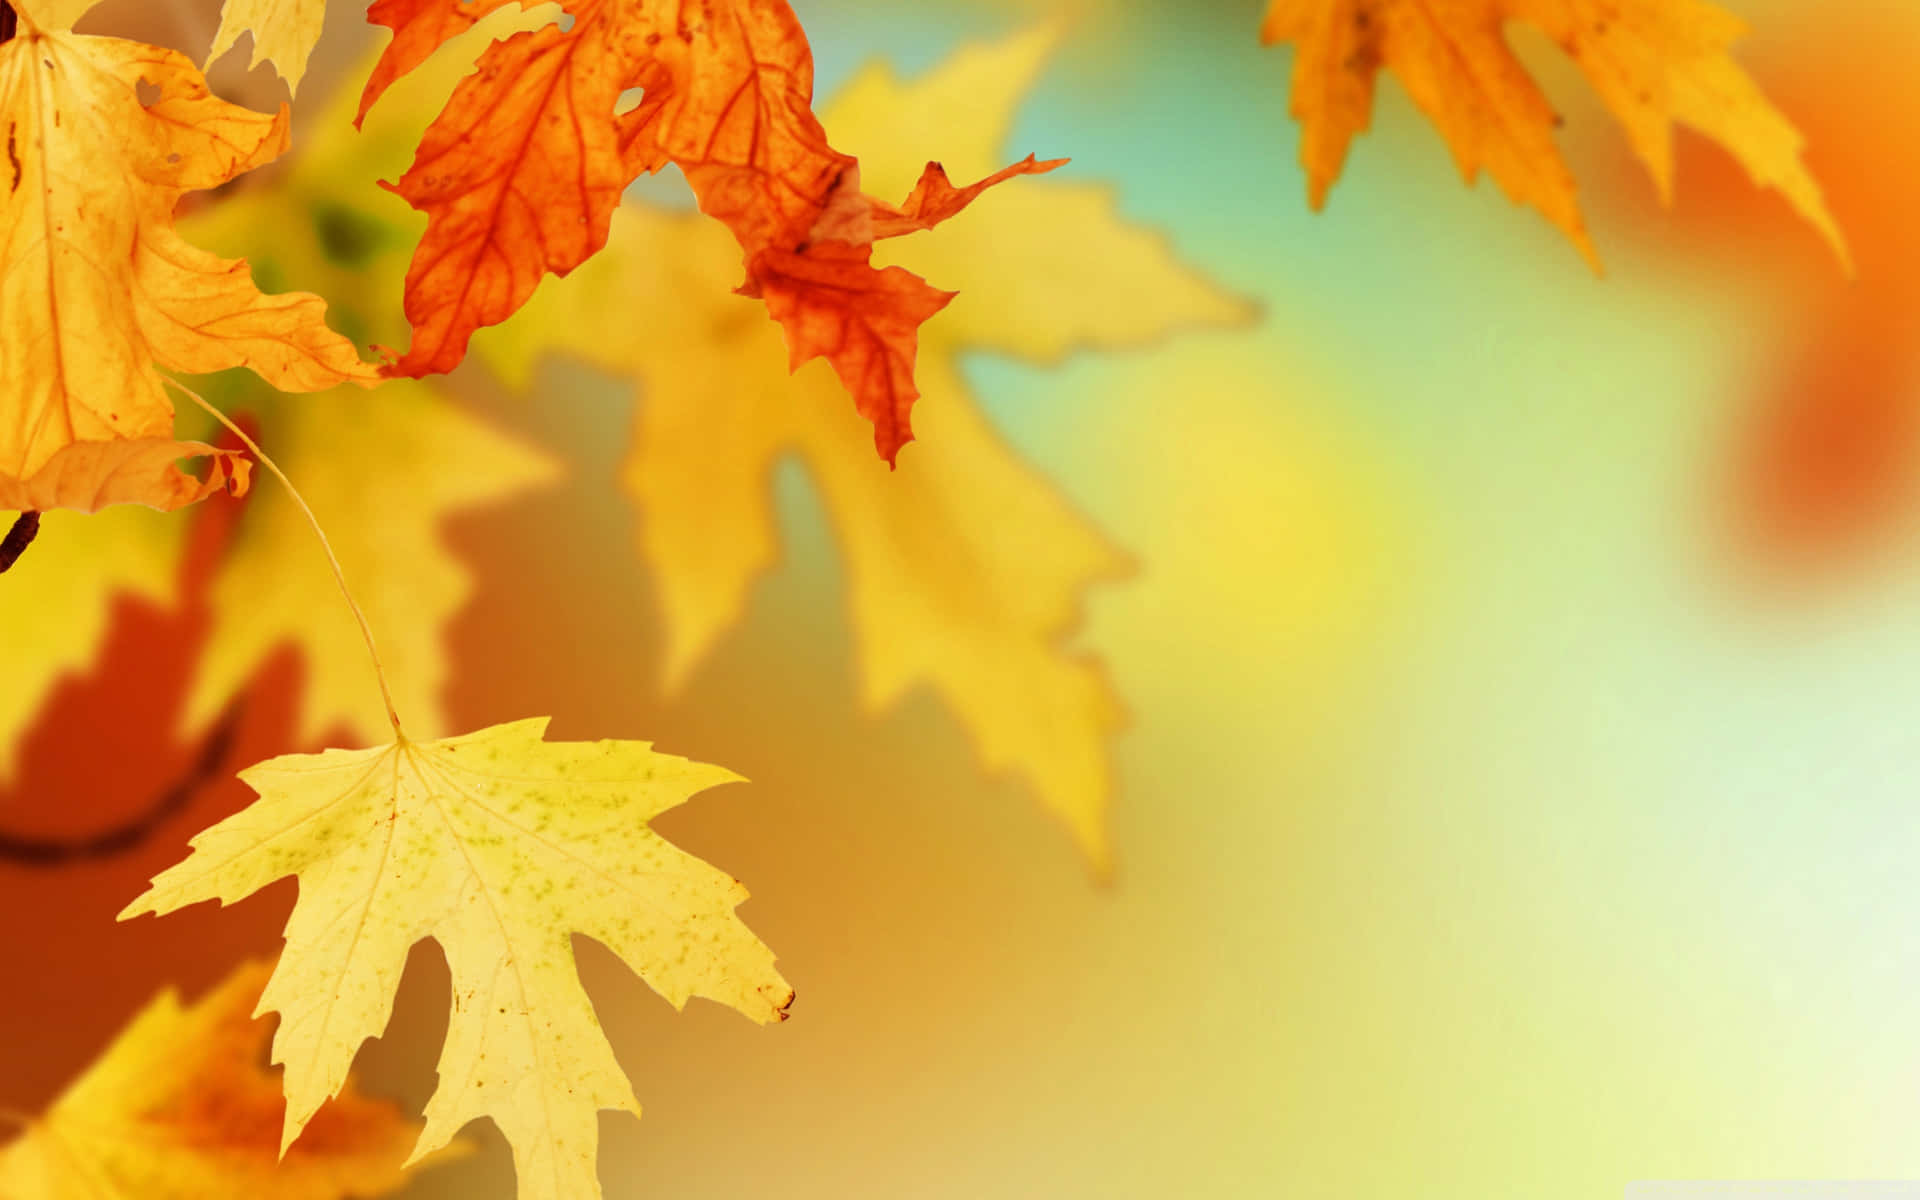 "Take in the colors of fall and enjoy the beauty of nature with vibrant Autumn foliage." Wallpaper